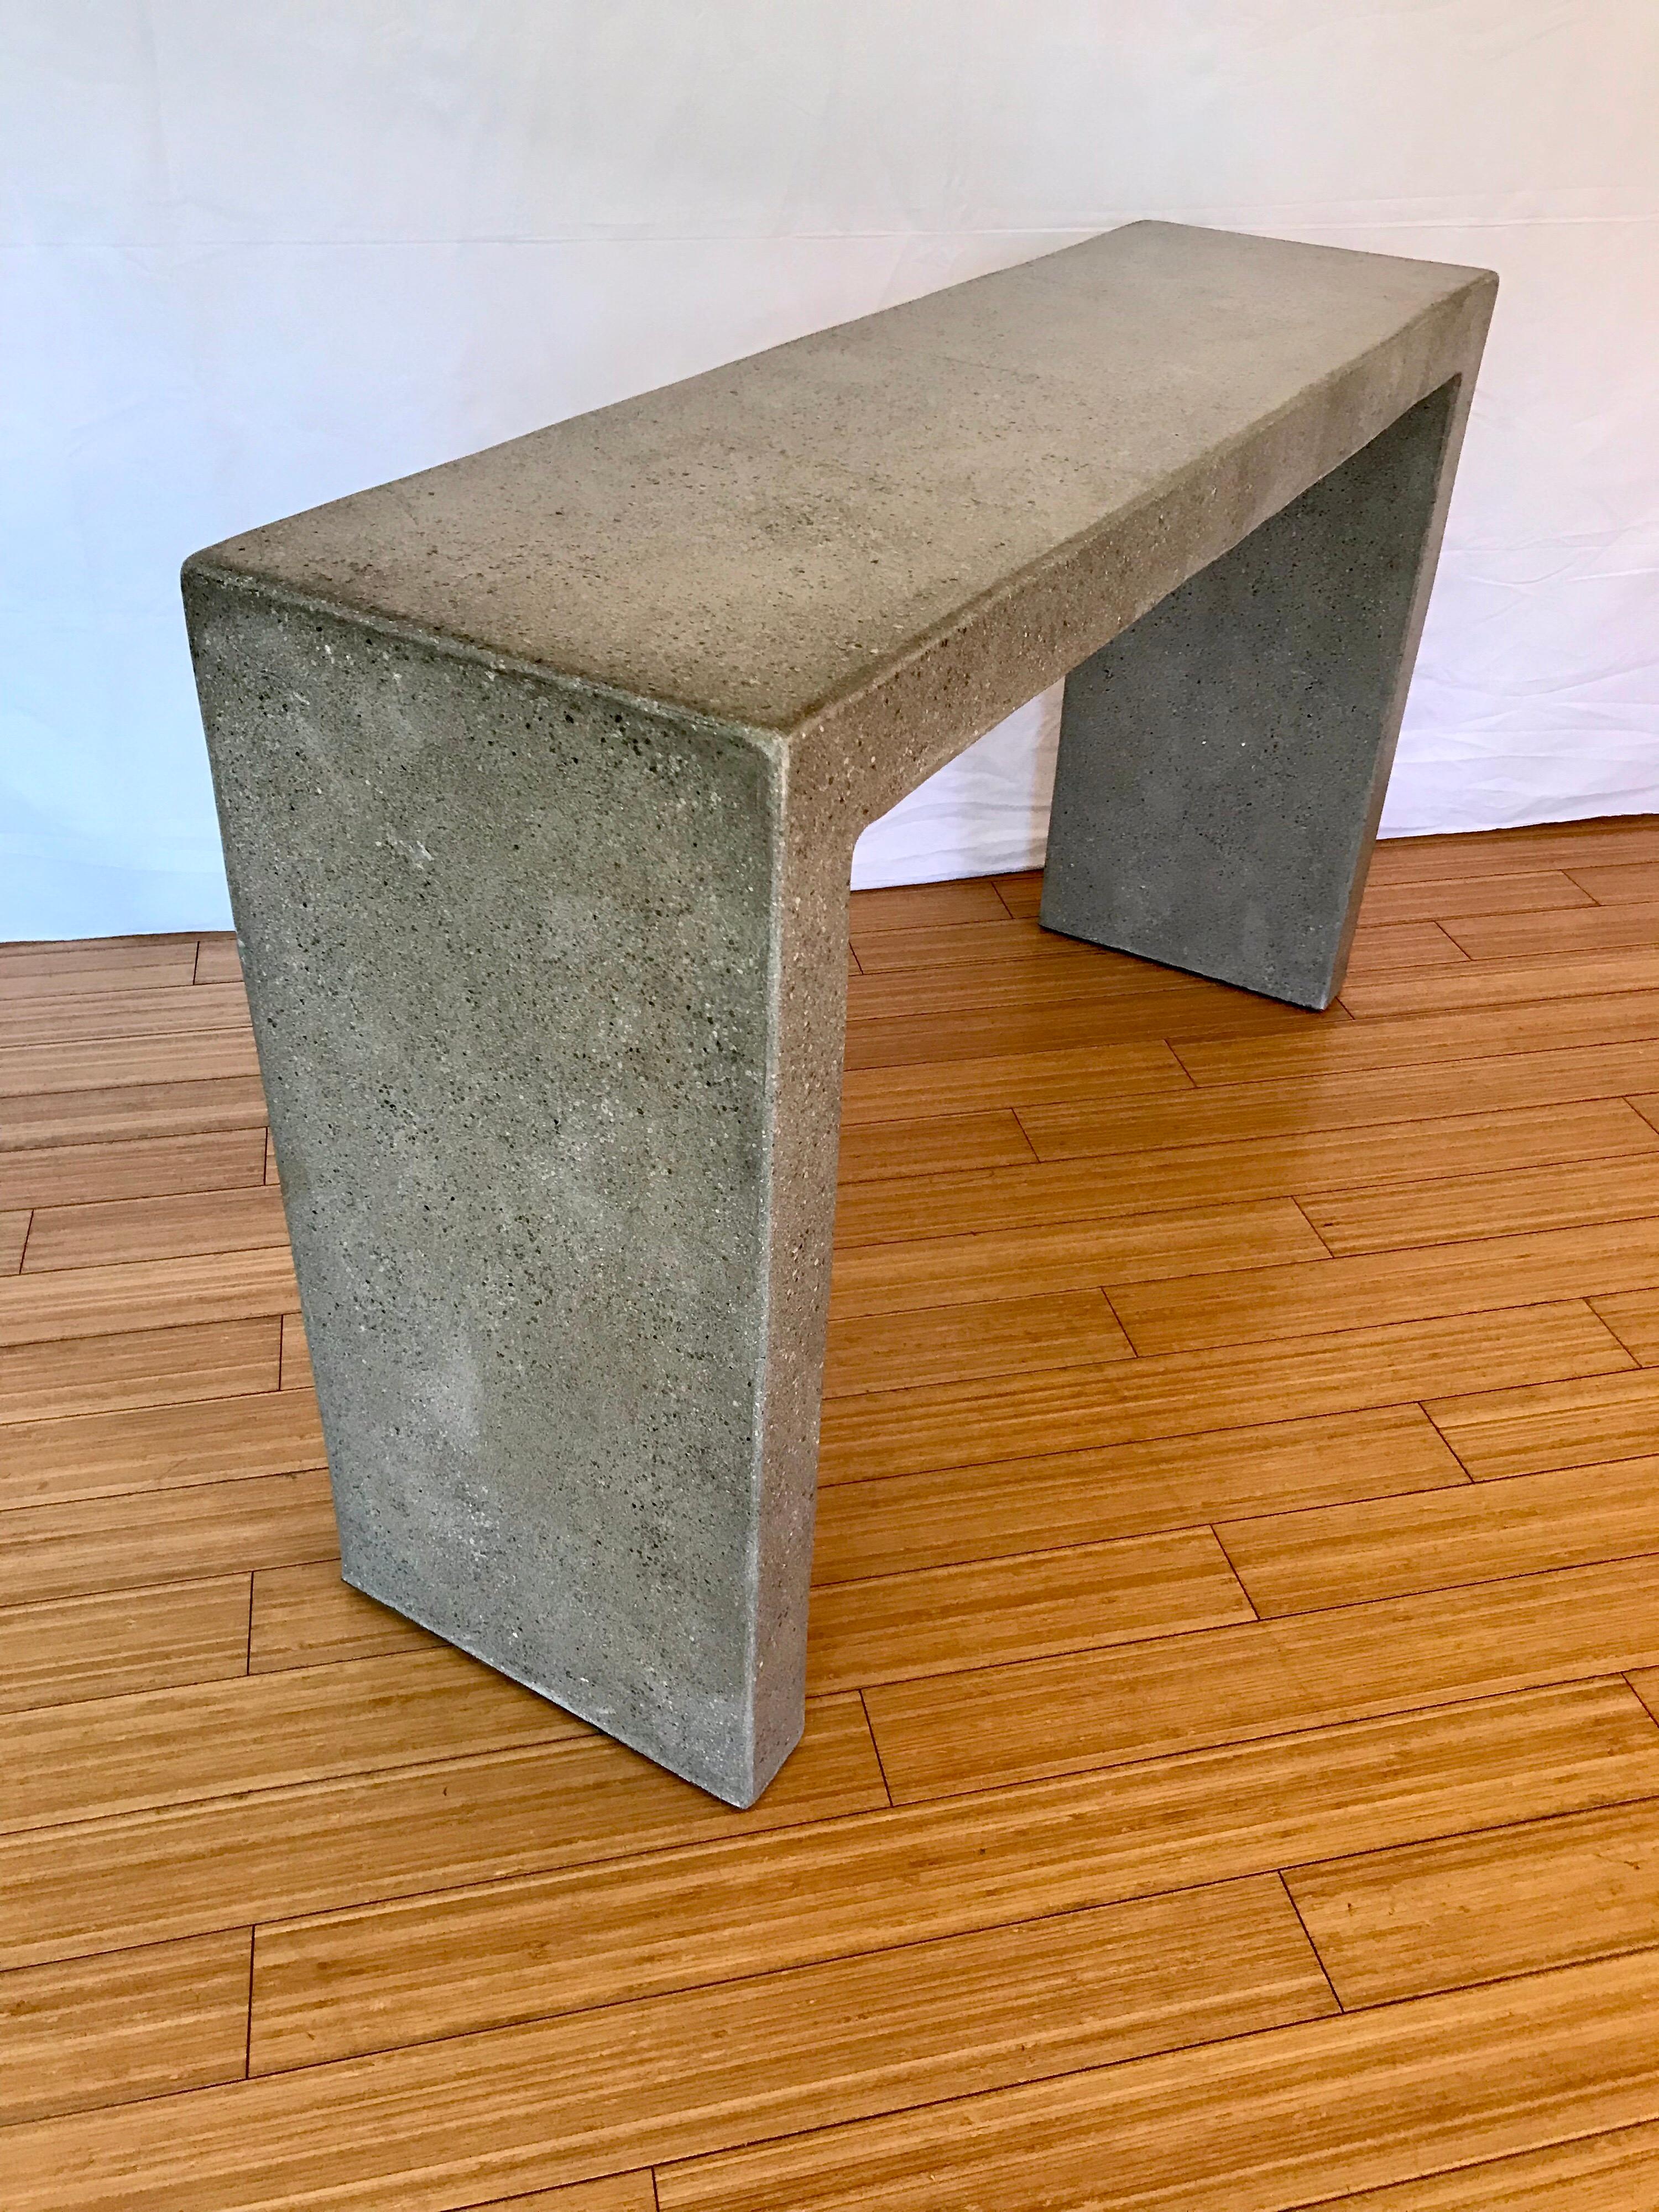 A simple and elegant form attributed to Karl Springer.
Made of cast concrete, weights roughly 200 pounds. It probably has some rebar wire inside for durability and stability.
It has a nice patina, and some surface hairline cracks (blends into the